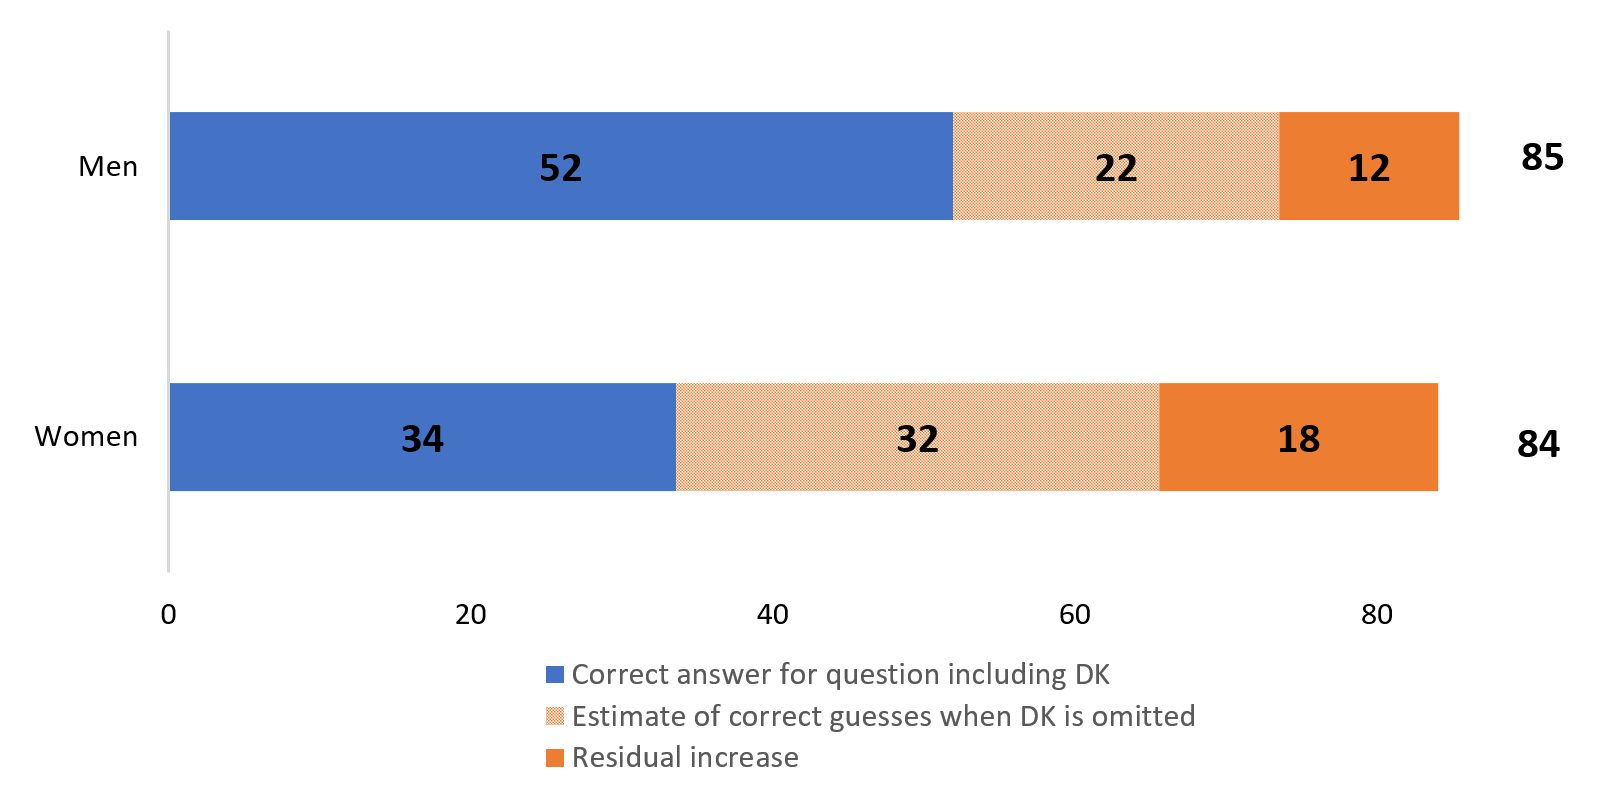 Figure 4c. Decomposing increase in 'Correct' share into increase due to guessing and residual increase, Panel C. Risk Diversification Question. See accessible link for data.